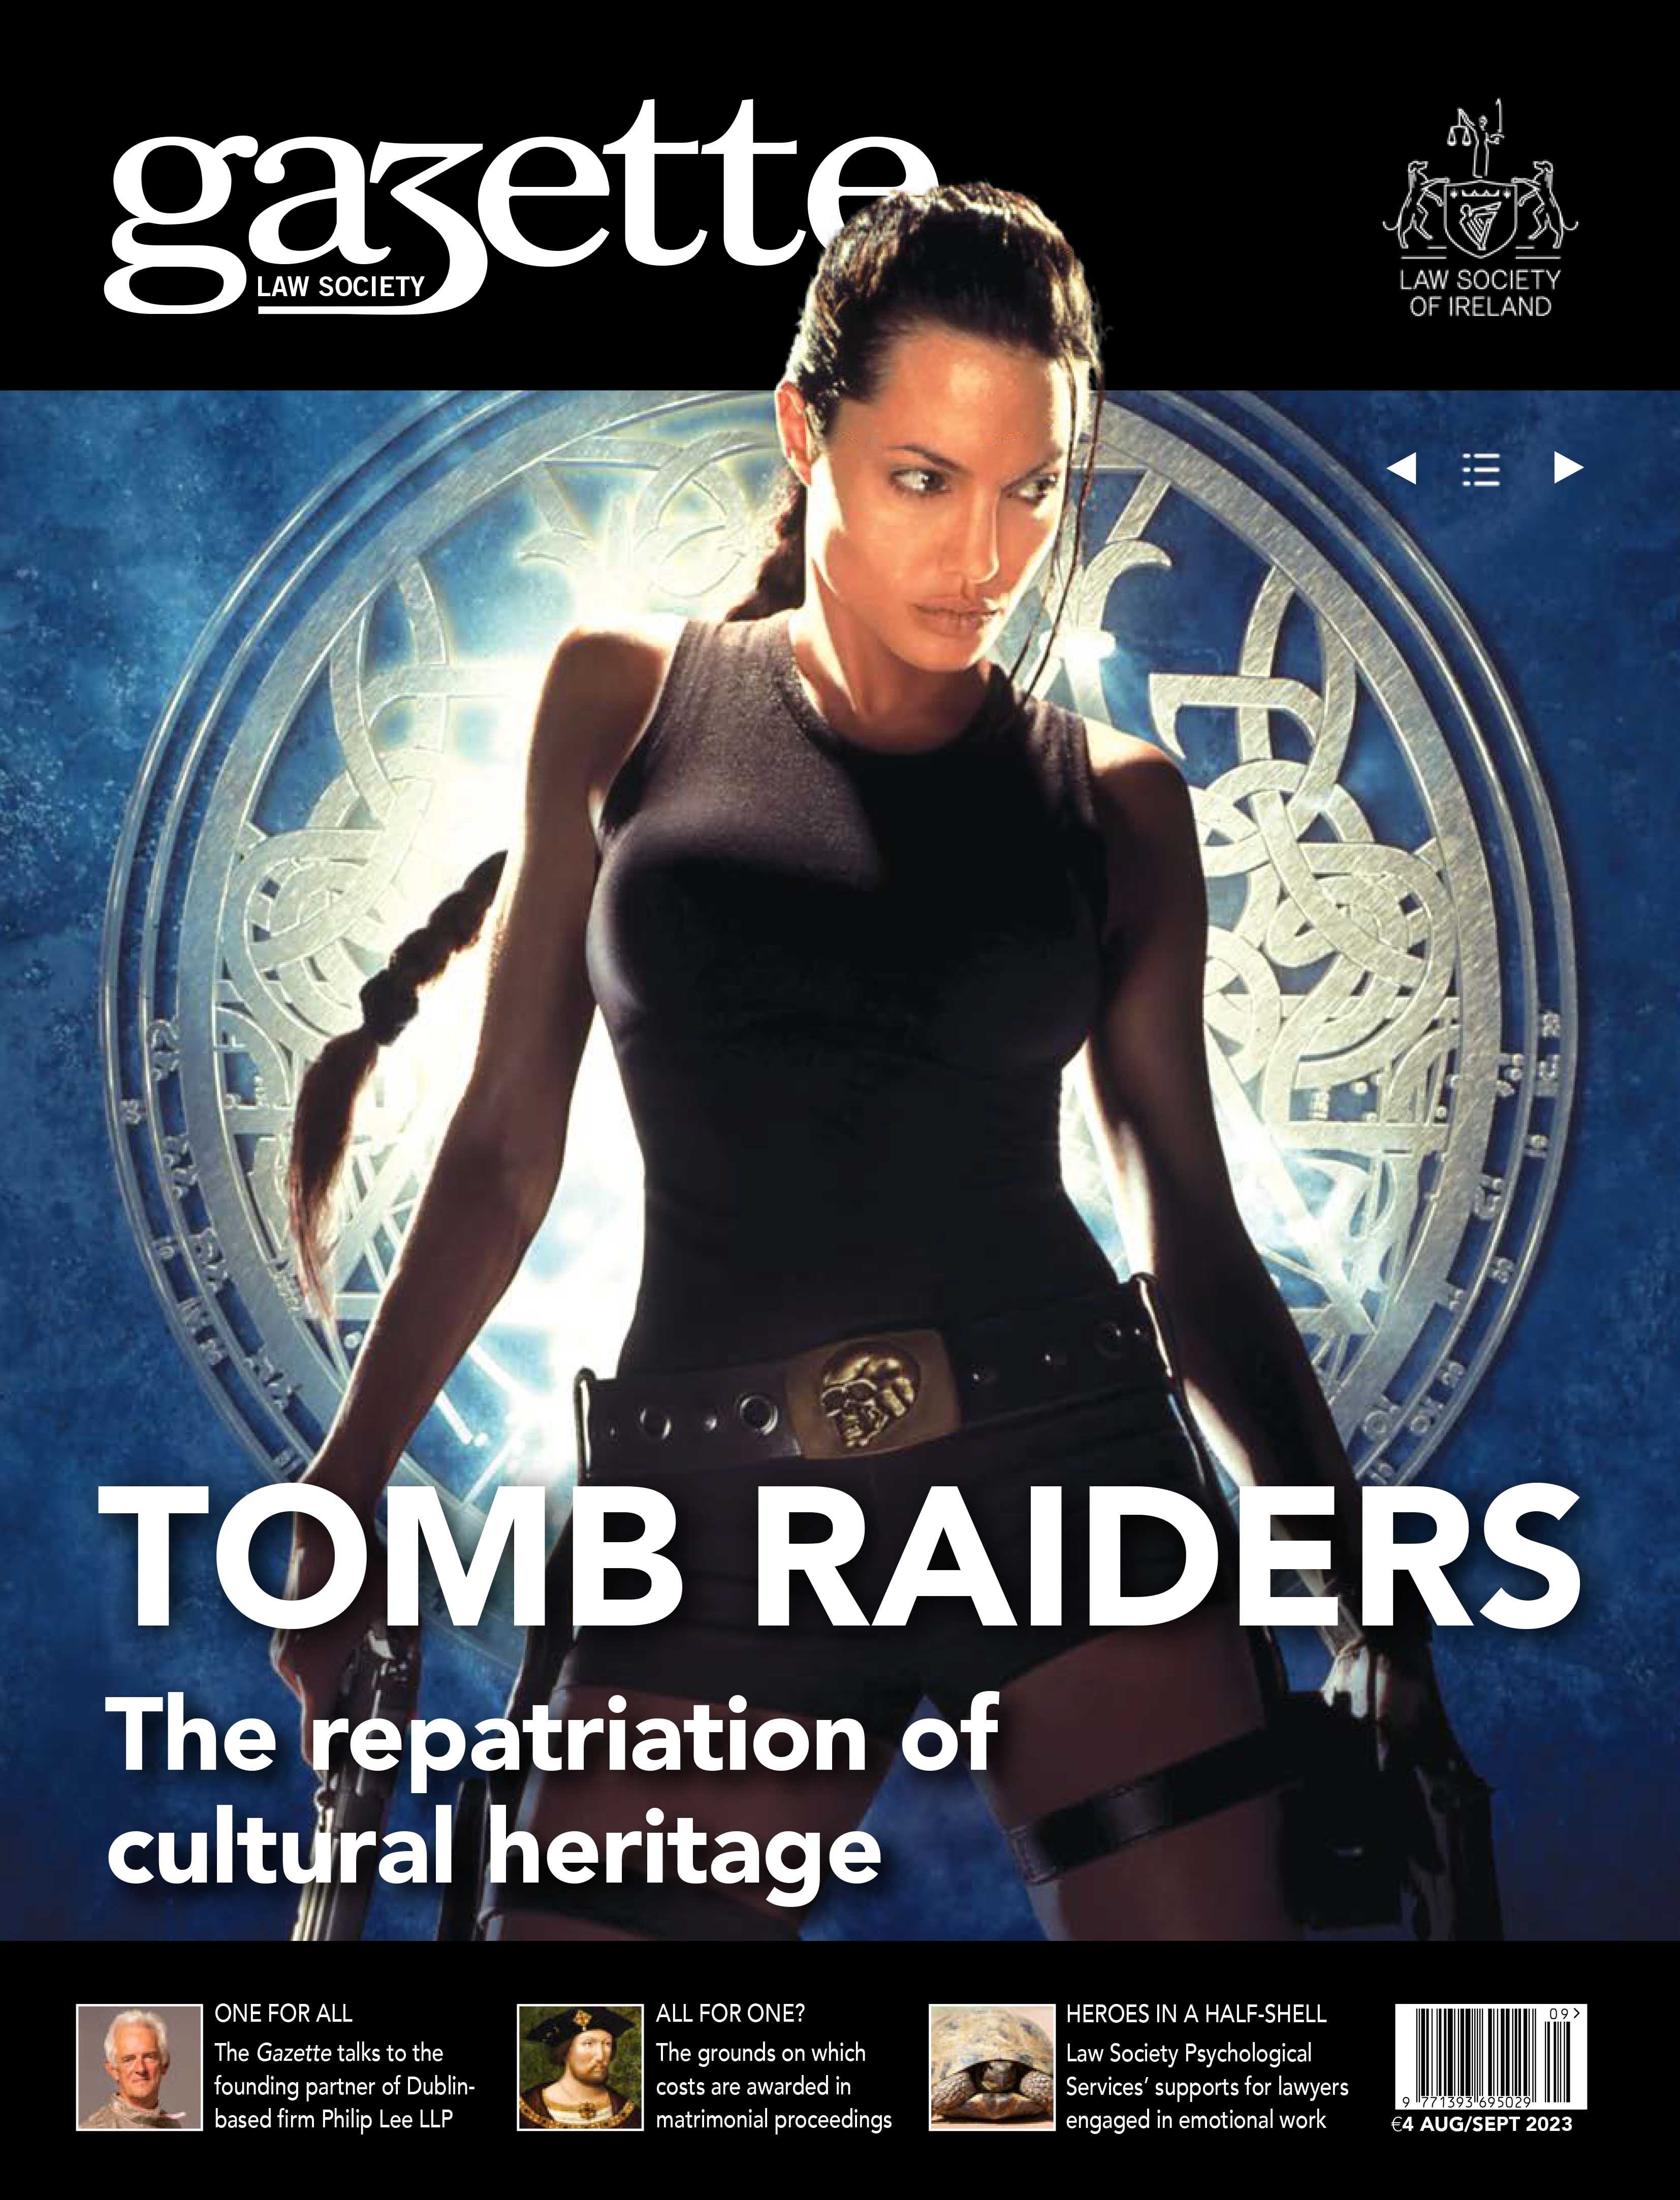 Tomb Raiders - The repatriation of cultural heritage